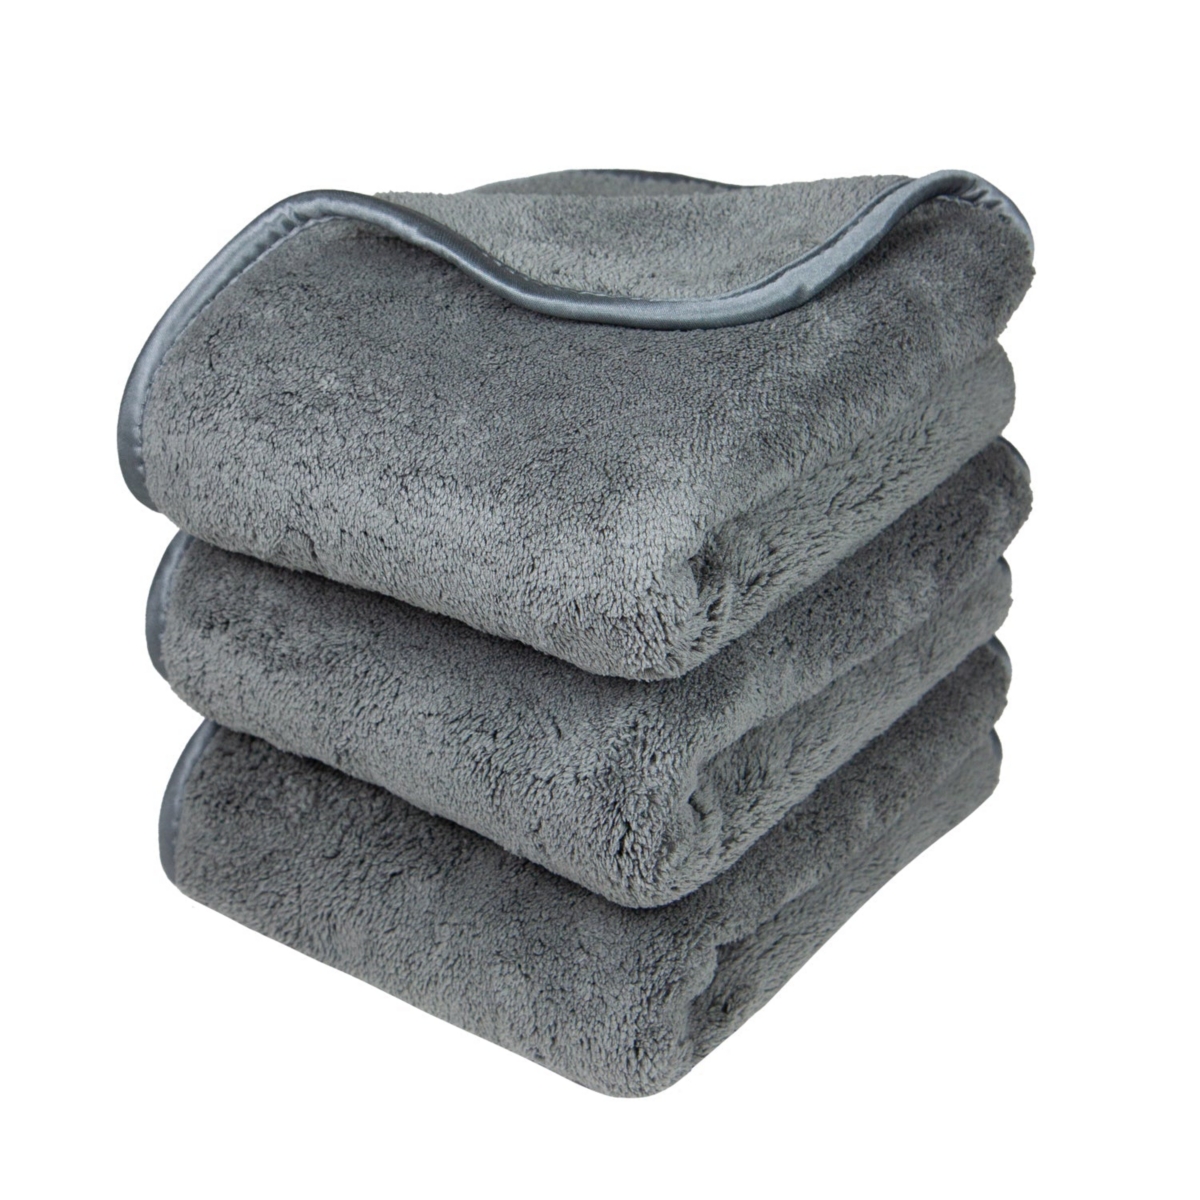 Towelzilla Car Washing Towel (3 Pack), 18x30, Ultra-Thick and Absorbent 800 Gsm - Grey